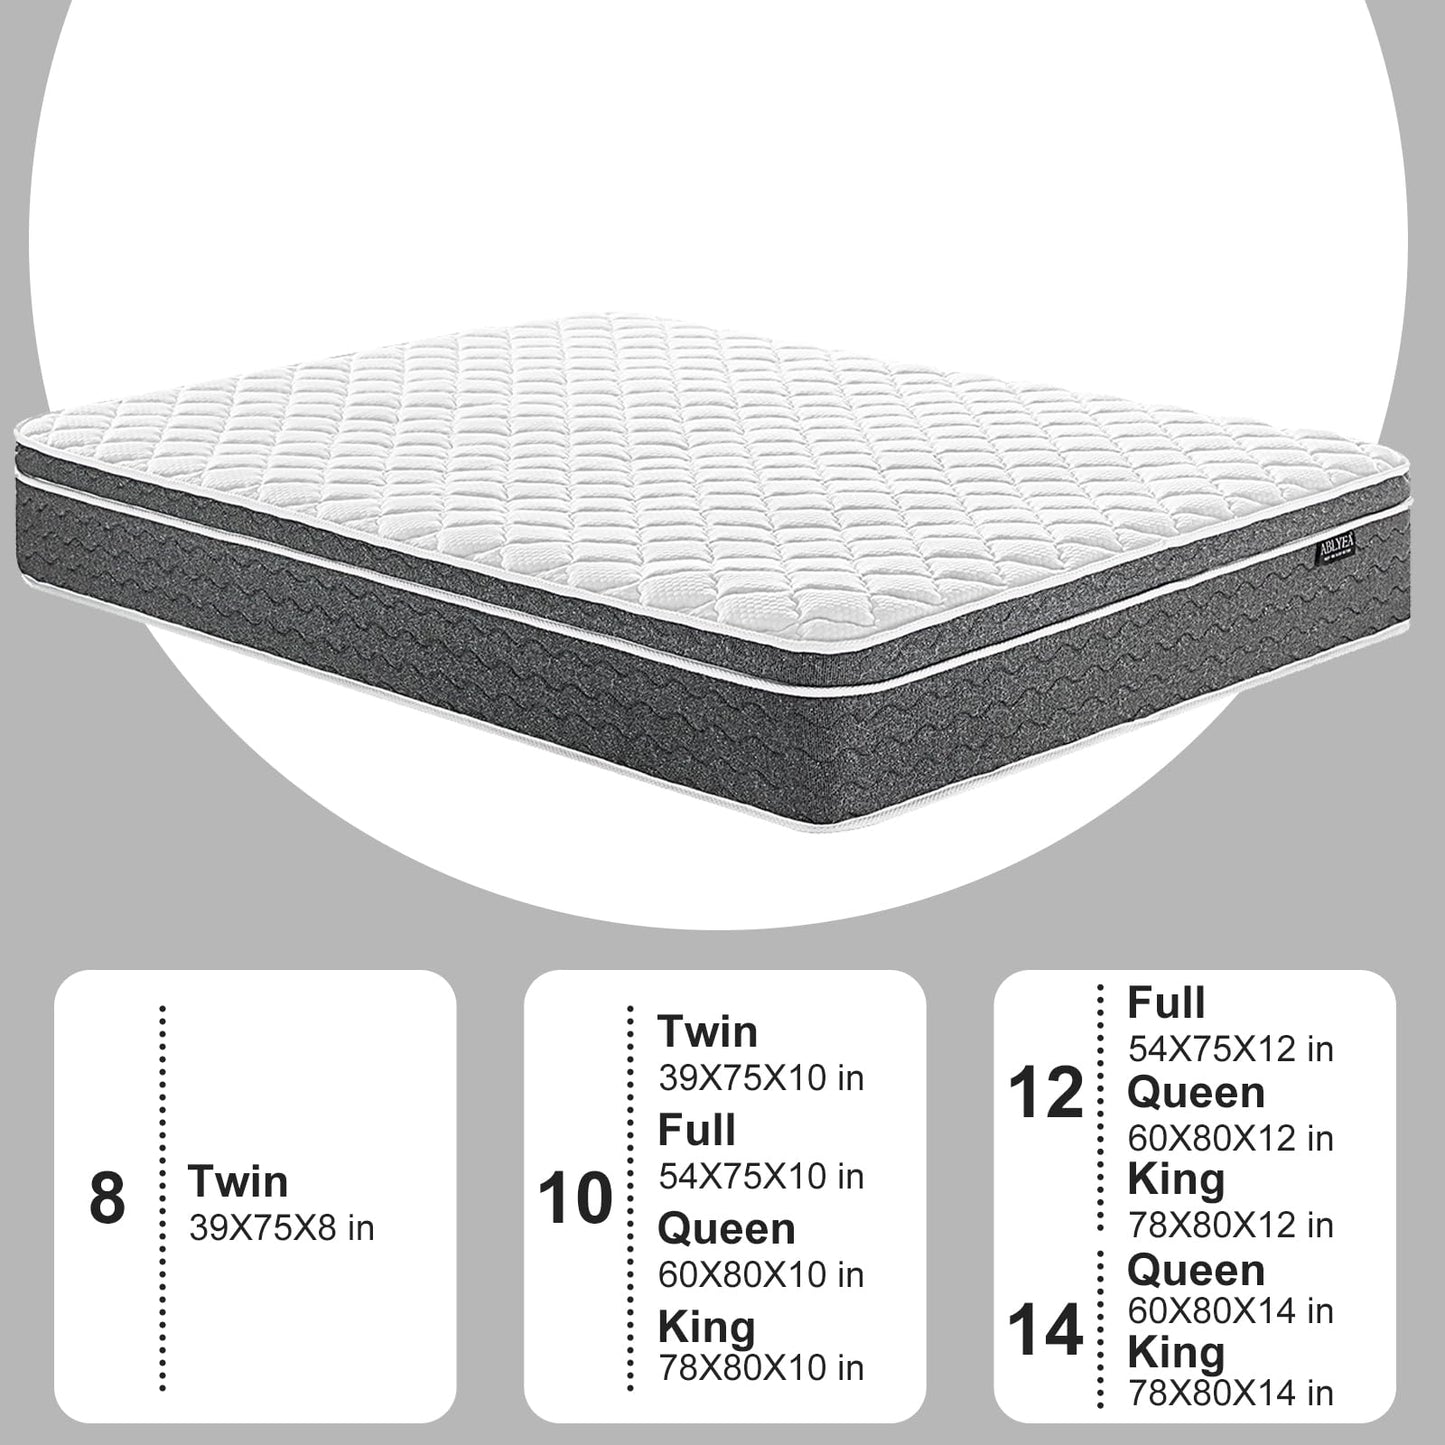 Ablyea Queen Mattresses 12 Inch Hybrid Mattress in a Box with Gel Memory Foam, Individually Wrapped Pocket Coils Innerspring, CertiPUR-US Certified, Pressure Relief & Support, Medium Firm